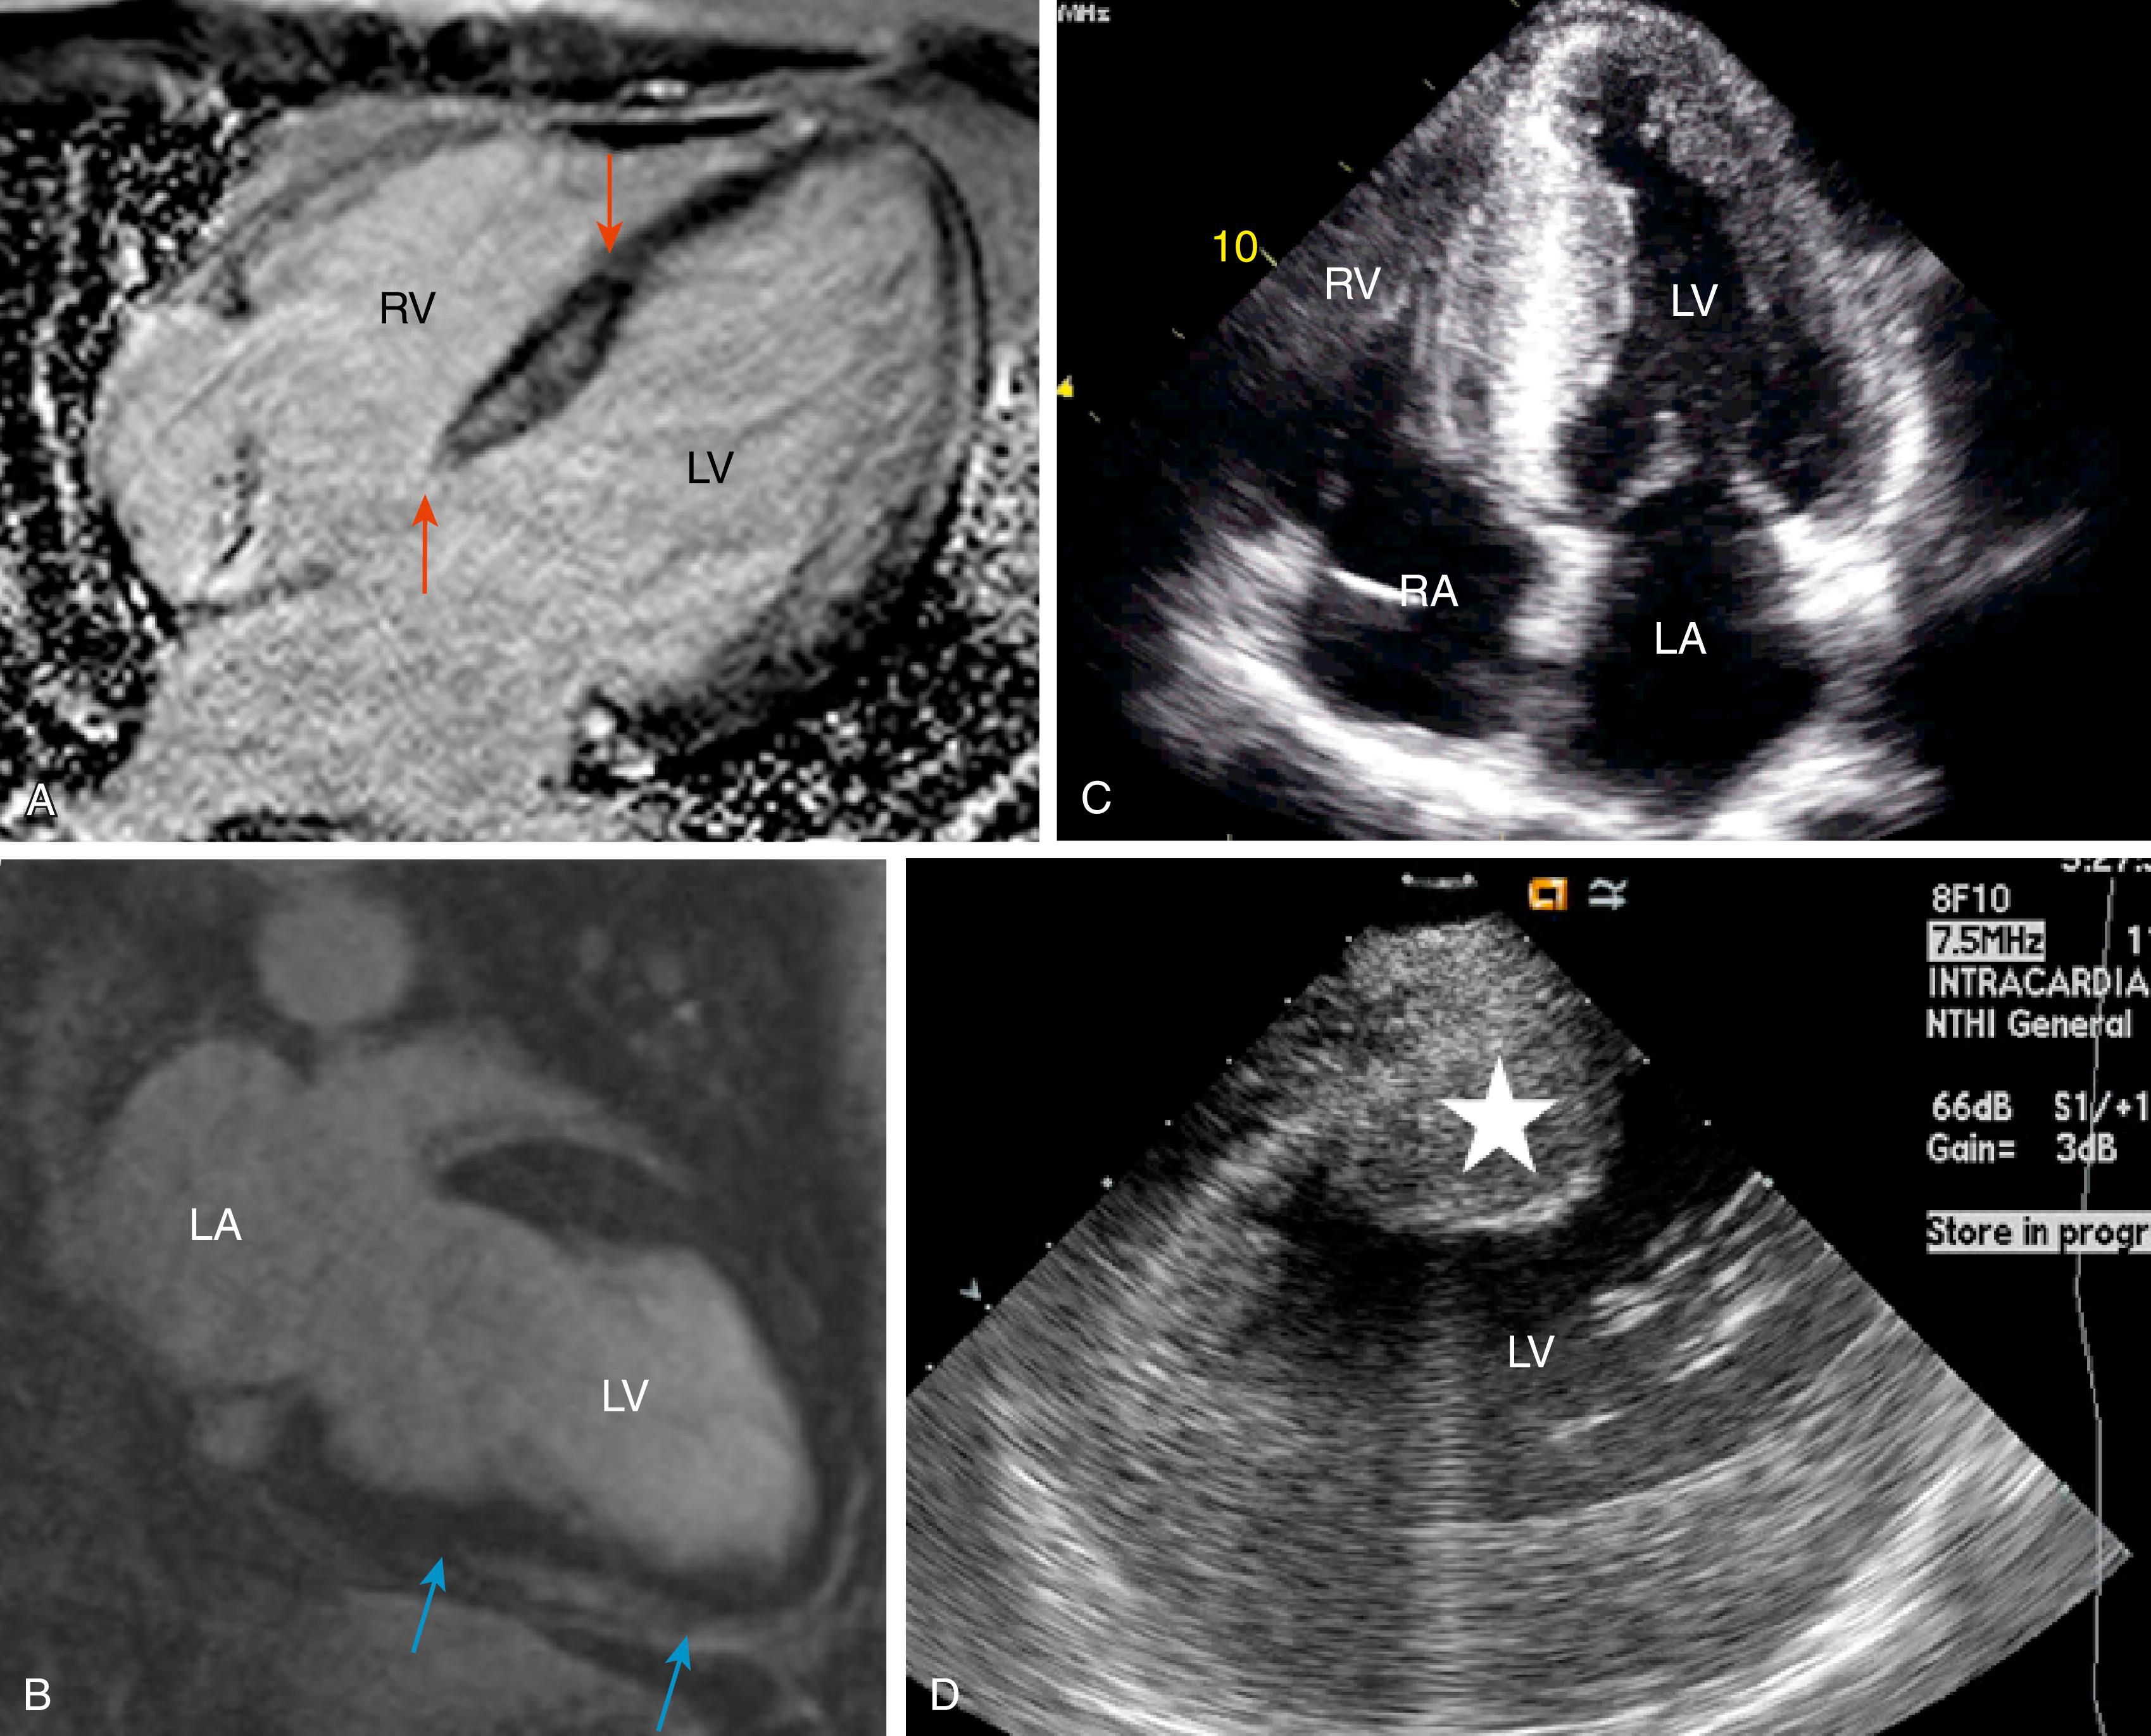 Fig. 136.1, Septal scar identified by magnetic resonance imaging (MRI) and echocardiographic imaging.